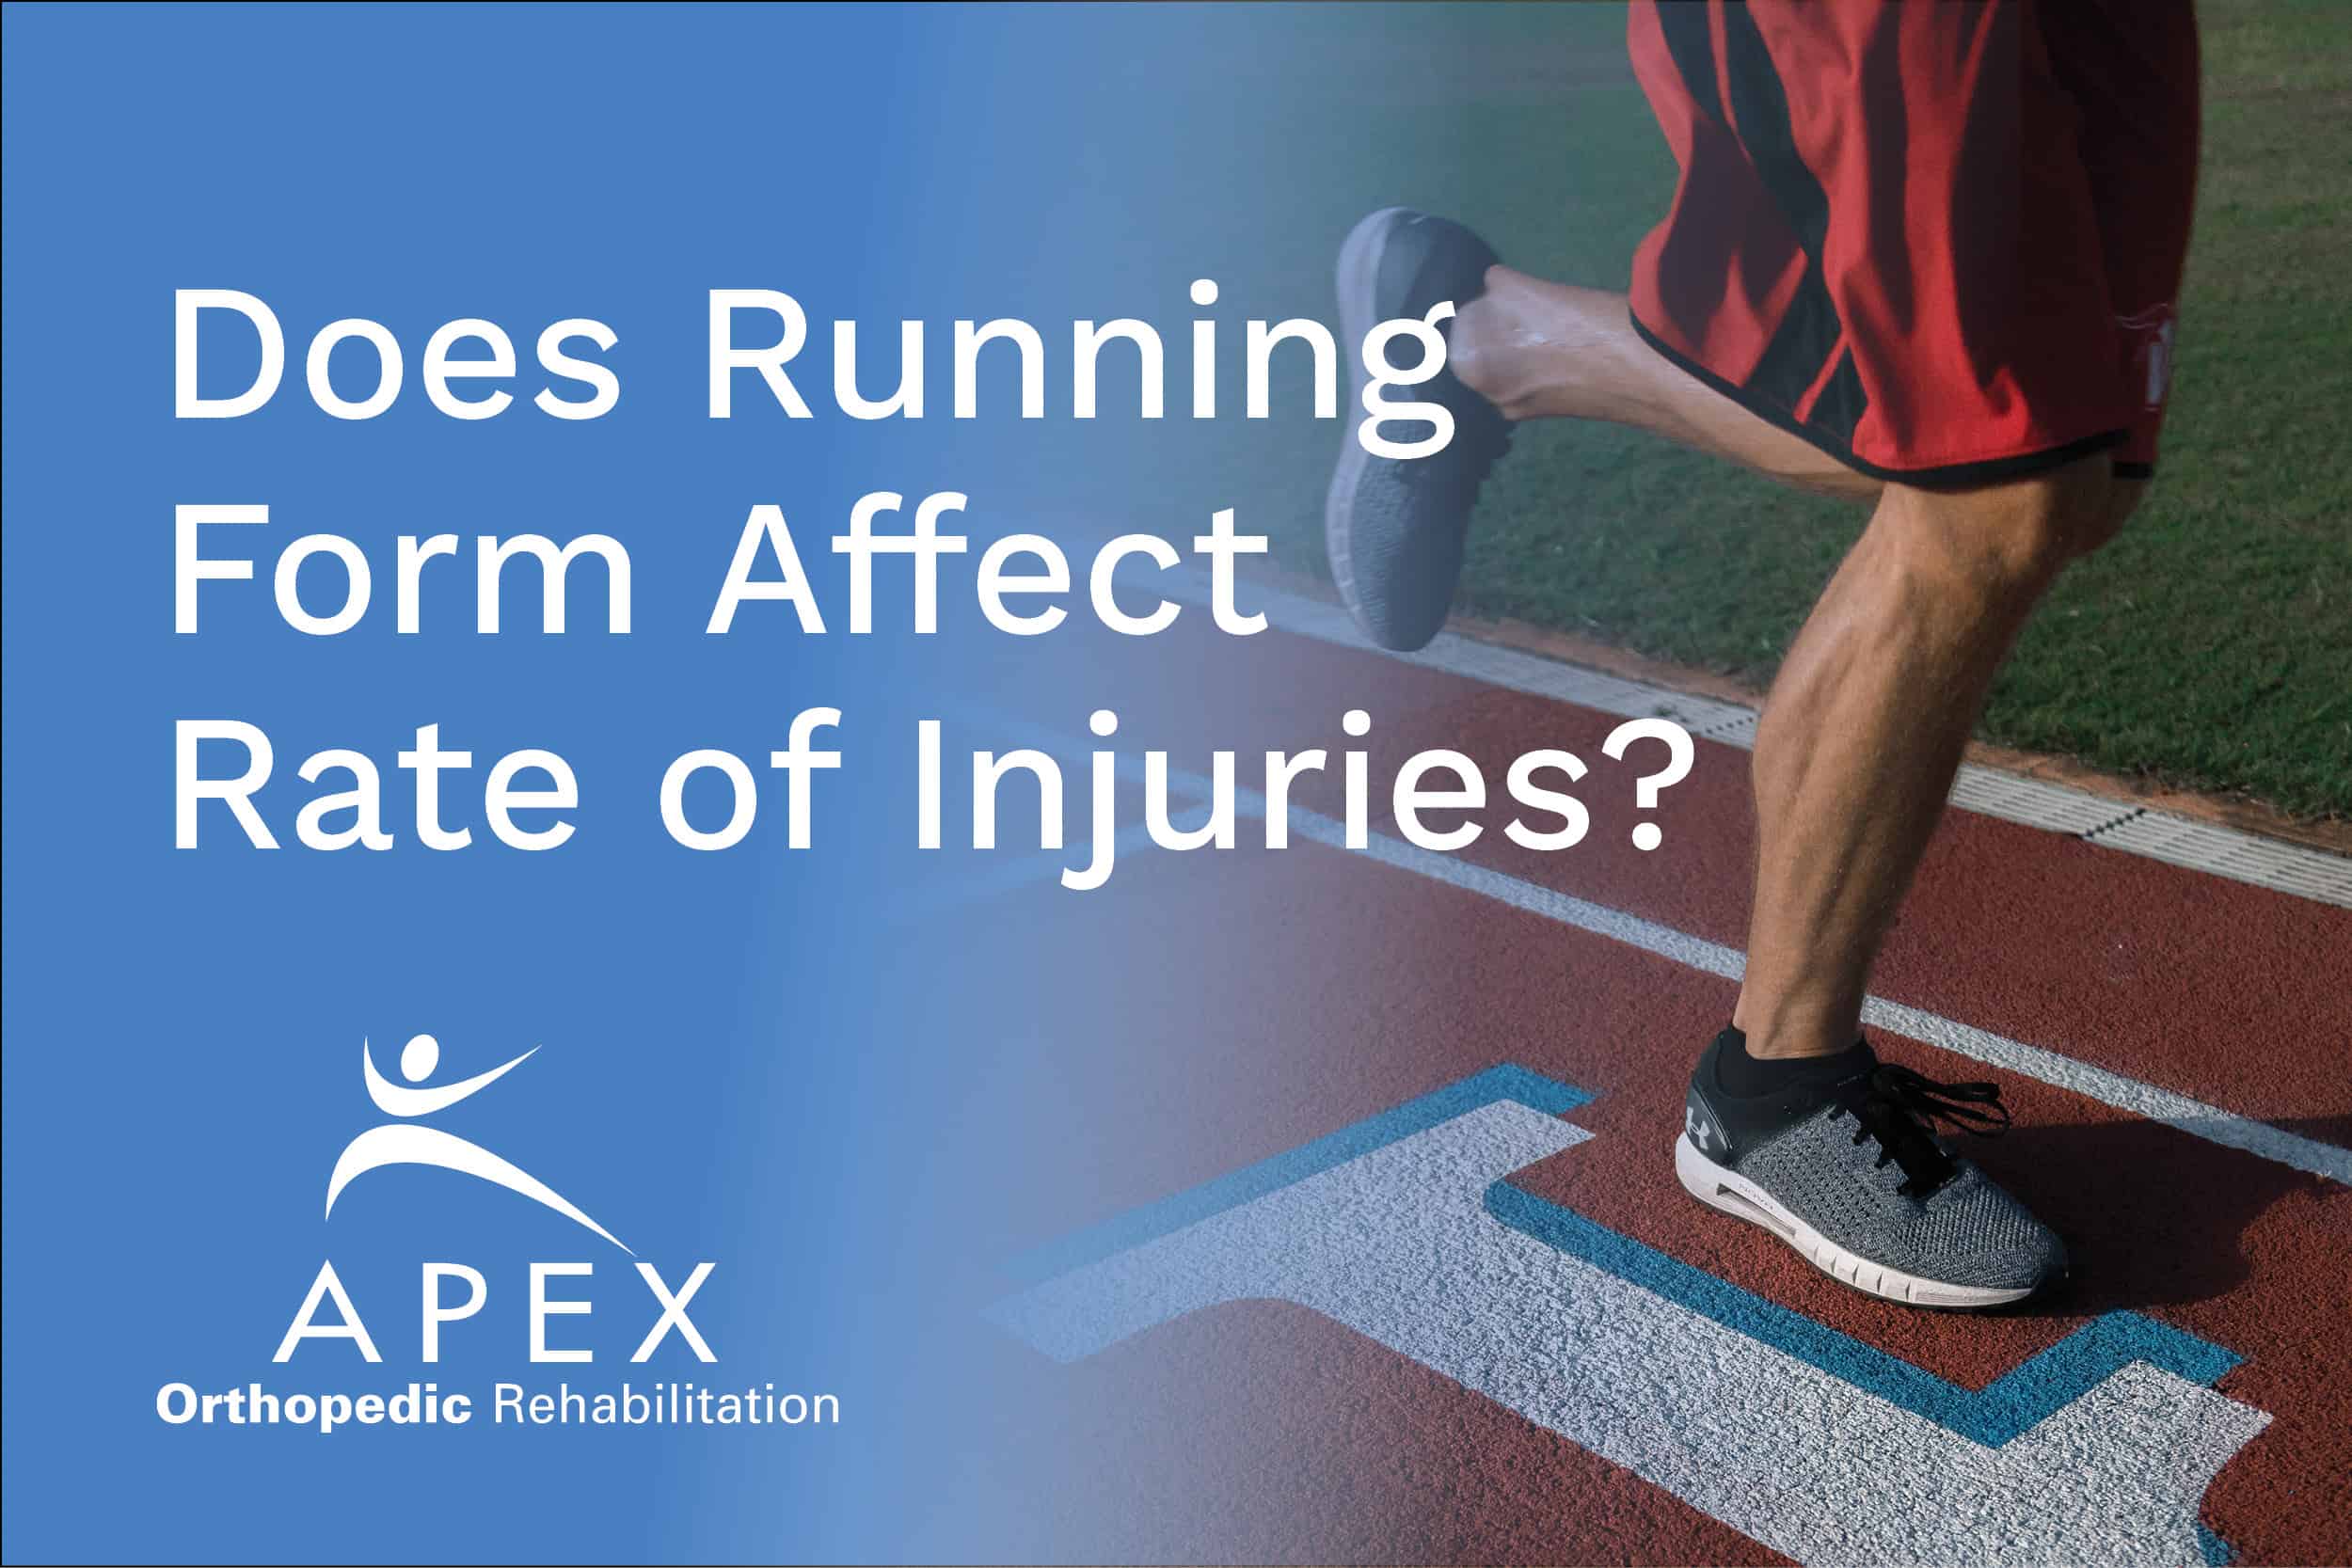 Does Running Form Affect Rate of Injuries?